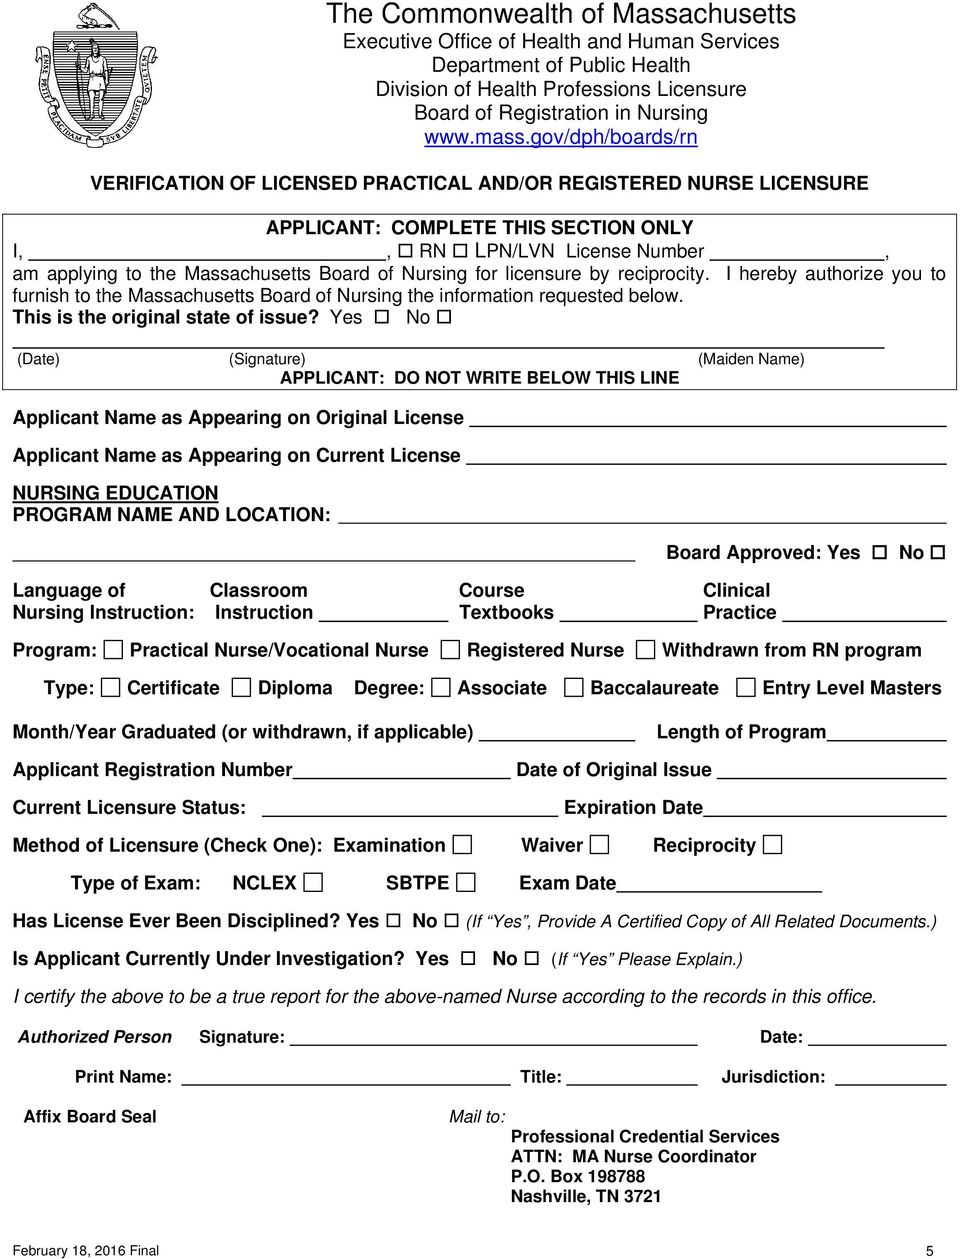 Yes No (Date) (Signature) (Maiden Name) APPLICANT: DO NOT WRITE BELOW THIS LINE Applicant Name as Appearing on Original License Applicant Name as Appearing on Current License NURSING EDUCATION